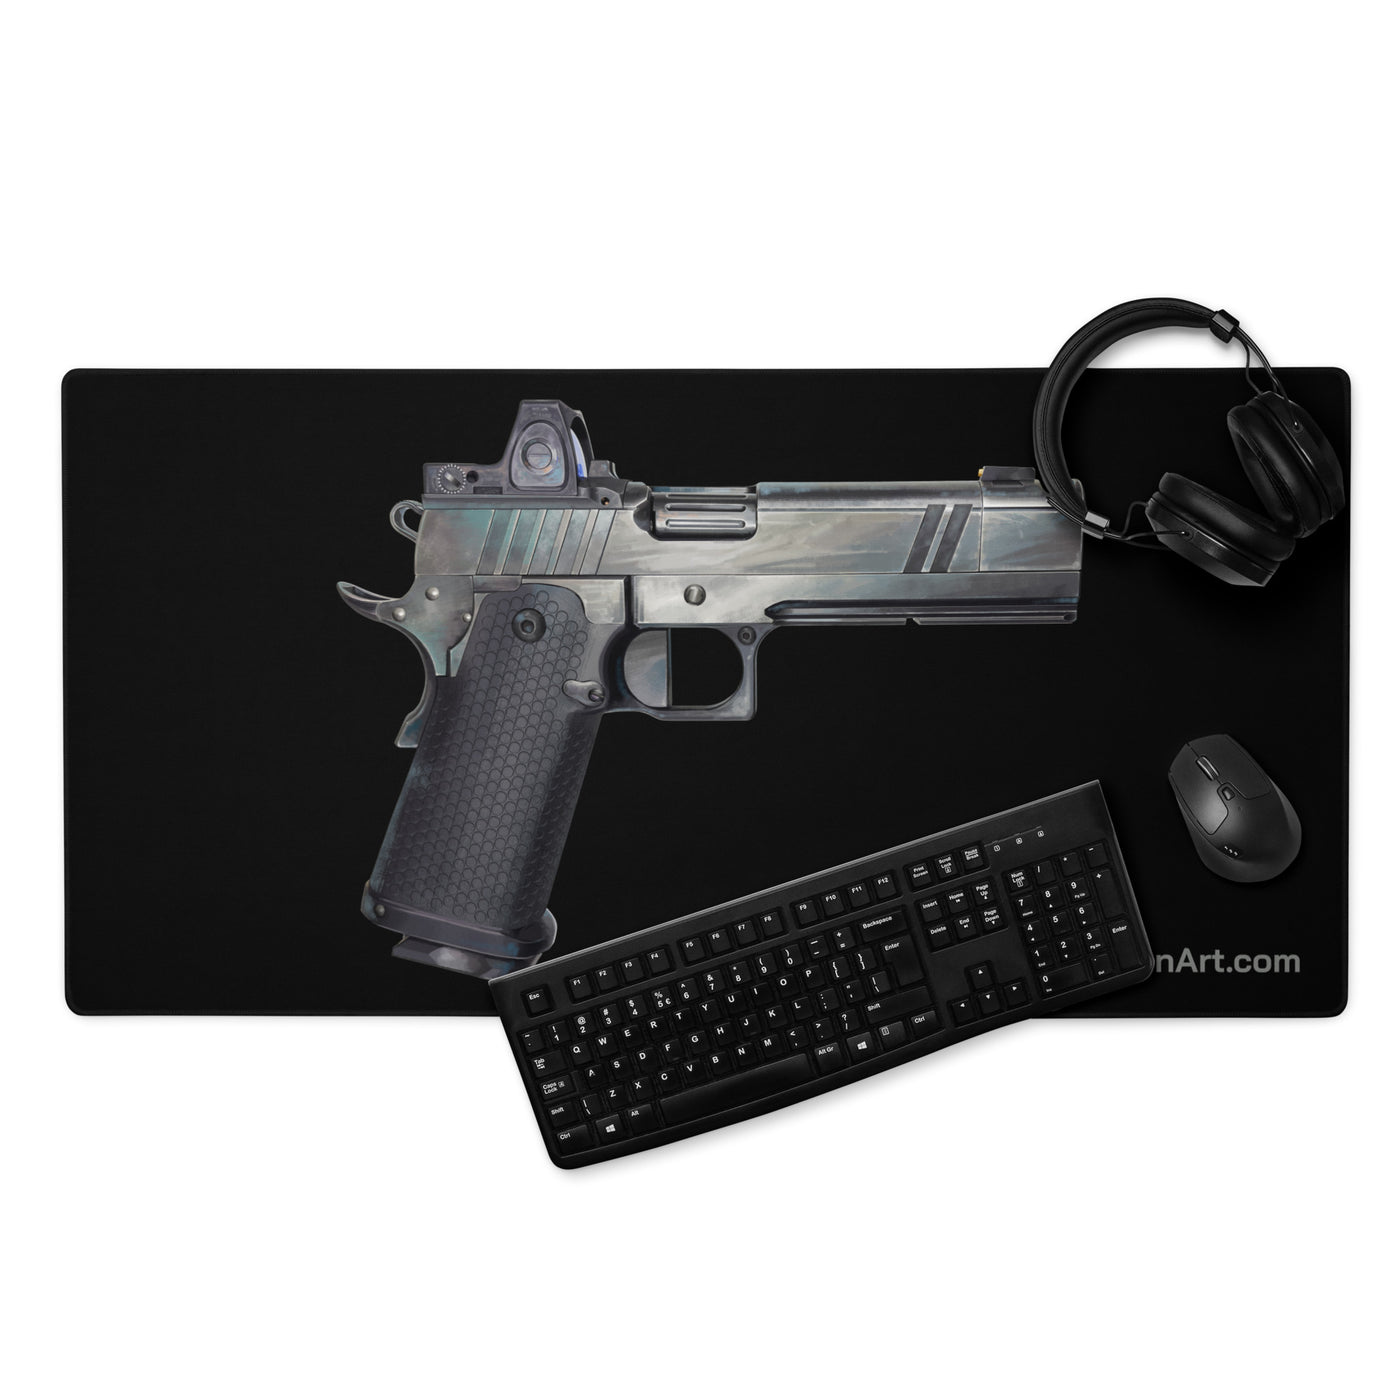 2011 Bravo Pistol Gaming Mouse Pad - Just The Piece - Black Background